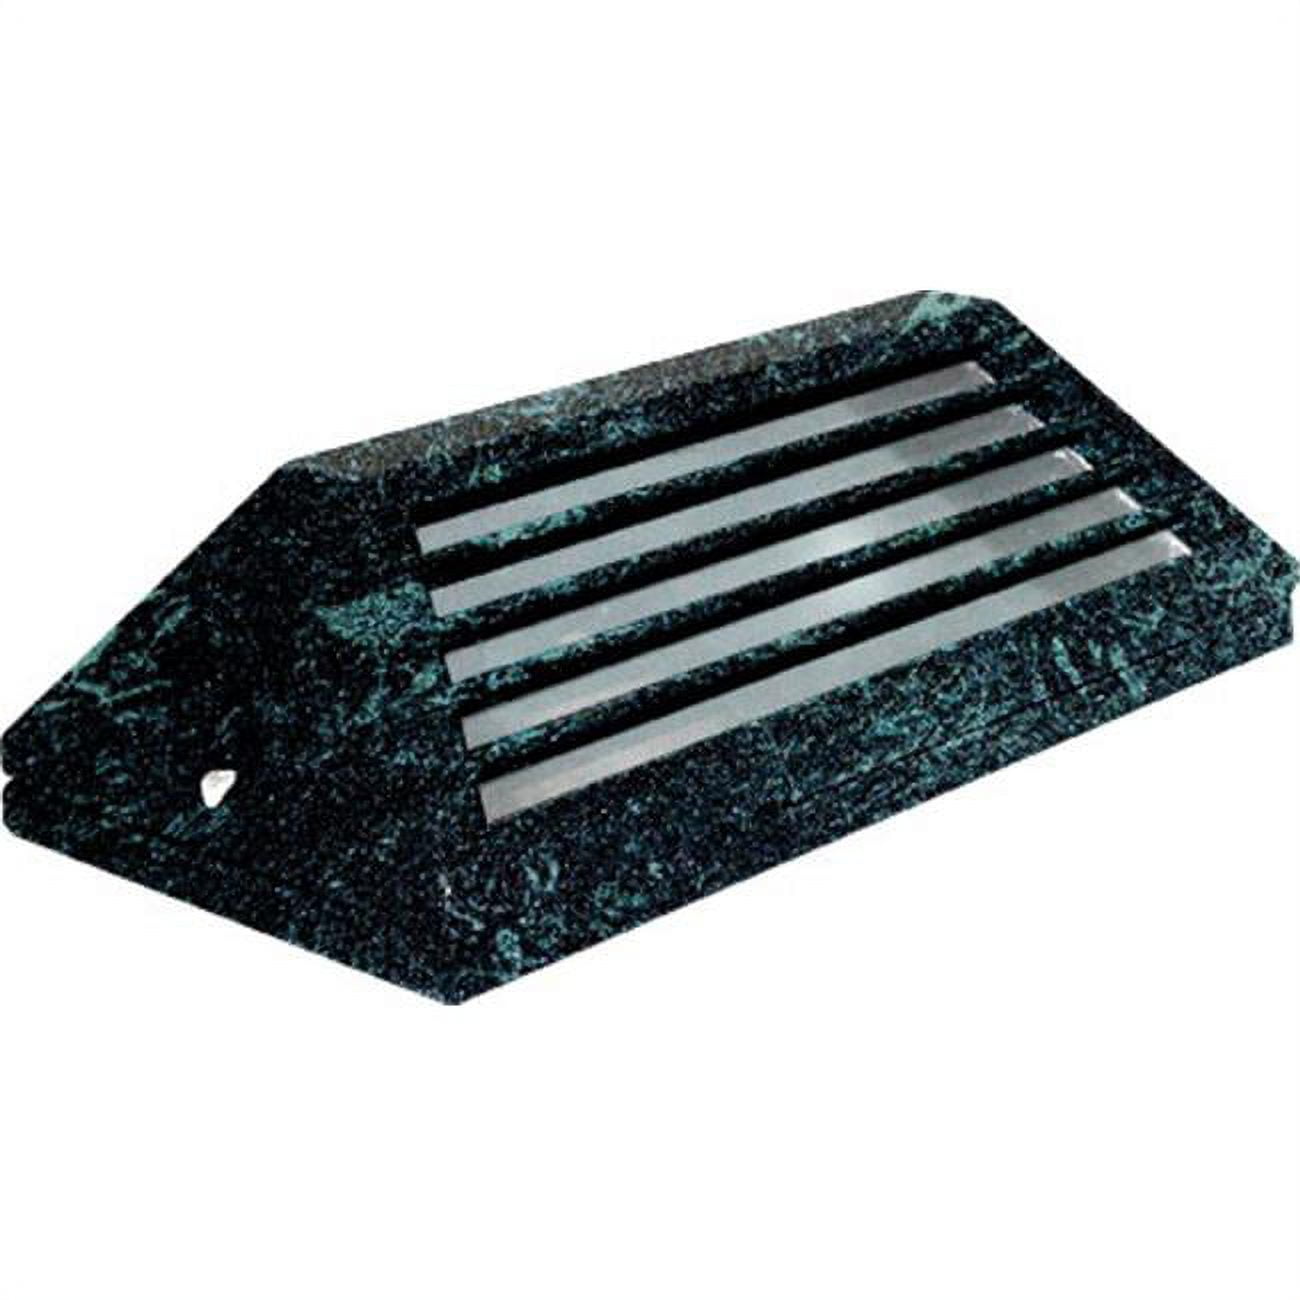 Picture of Dabmar Lighting LV608-VG Cast Aluminum Surface Mount Louvered Brick, Step, Wall & Deck Light, Verde Green - 4 x 7.25 x 2.25 in.